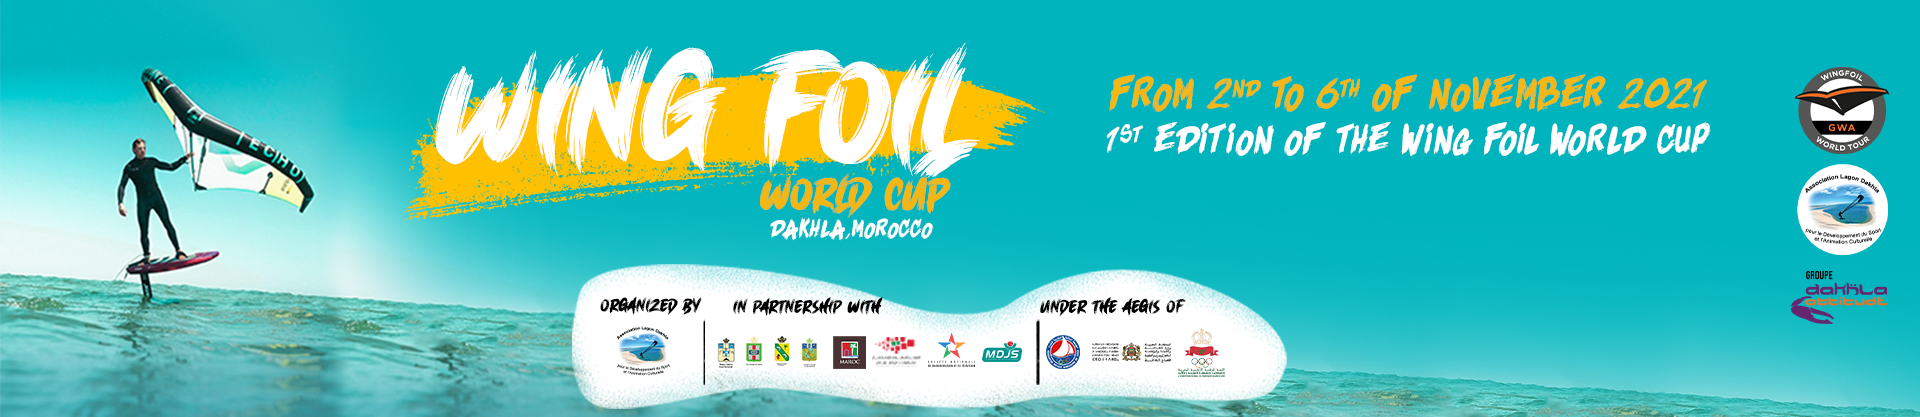 Image for GWA Wingfoil World Cup Morocco 2021